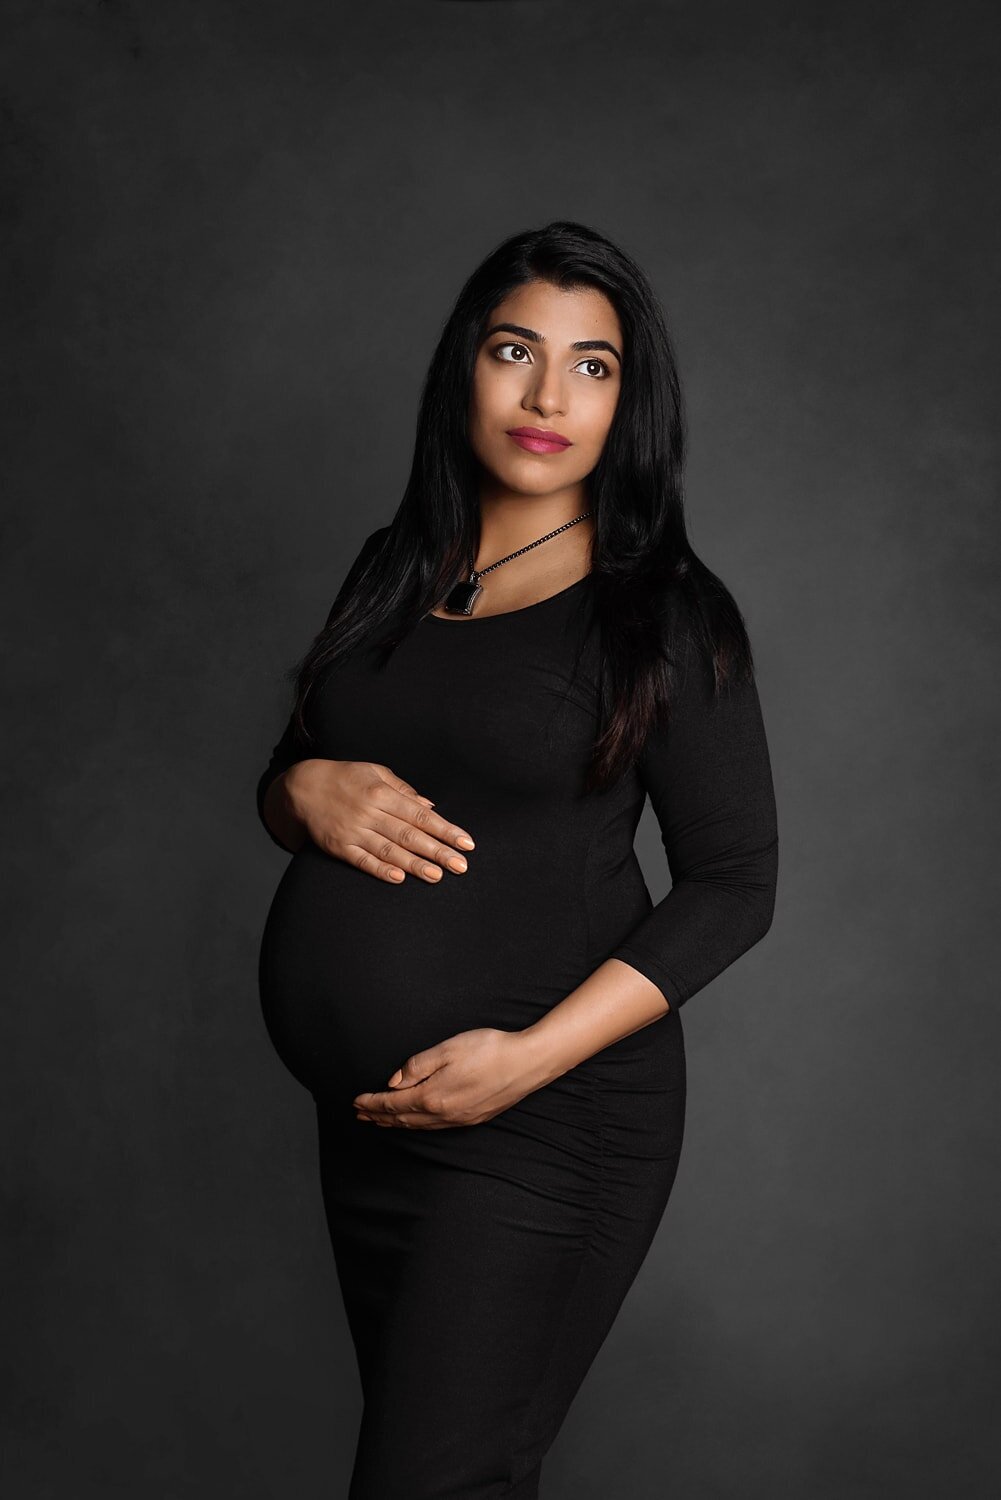 Gastown Vancouver Classic Dramatic Studio Maternity Photography